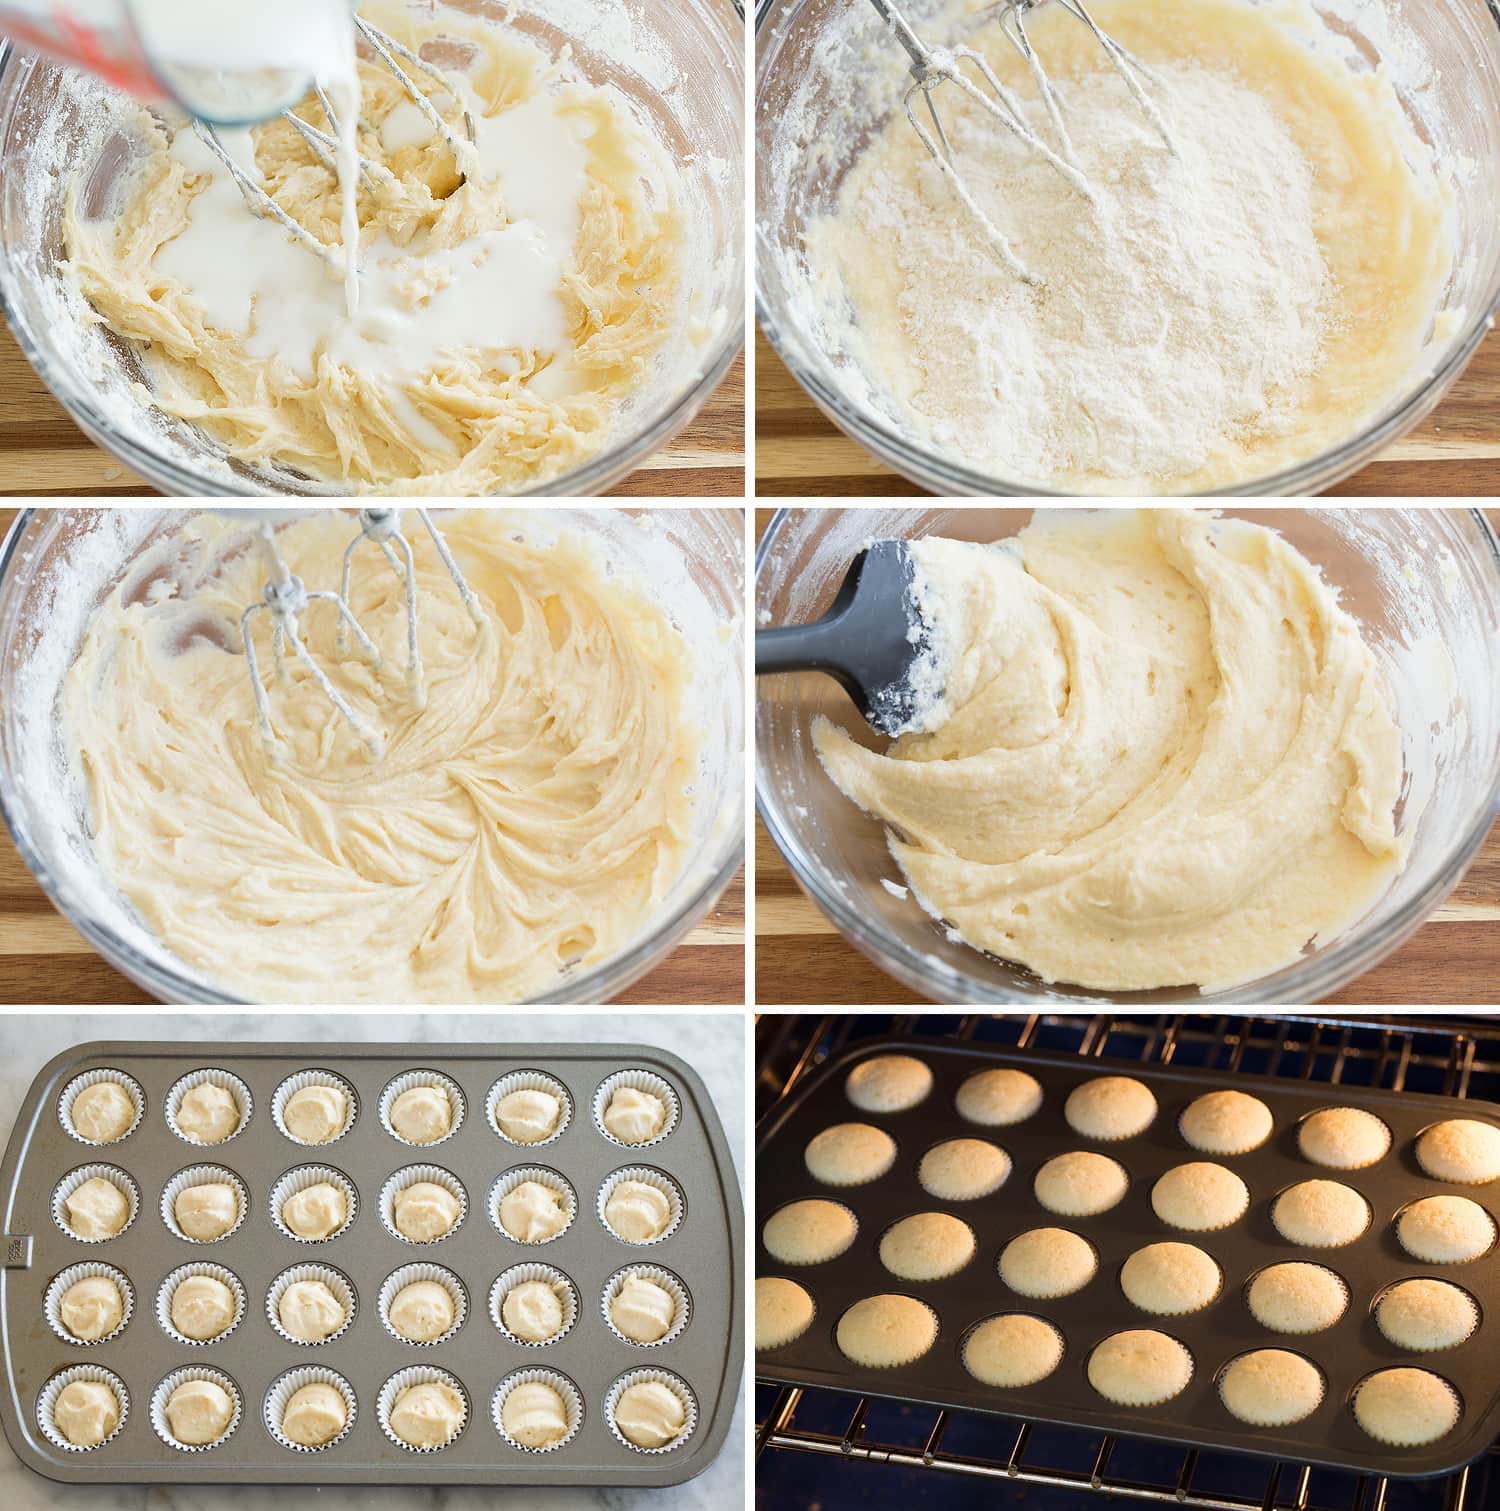 Continued steps of making mini cupcake batter and putting in mini muffin pan to bake.